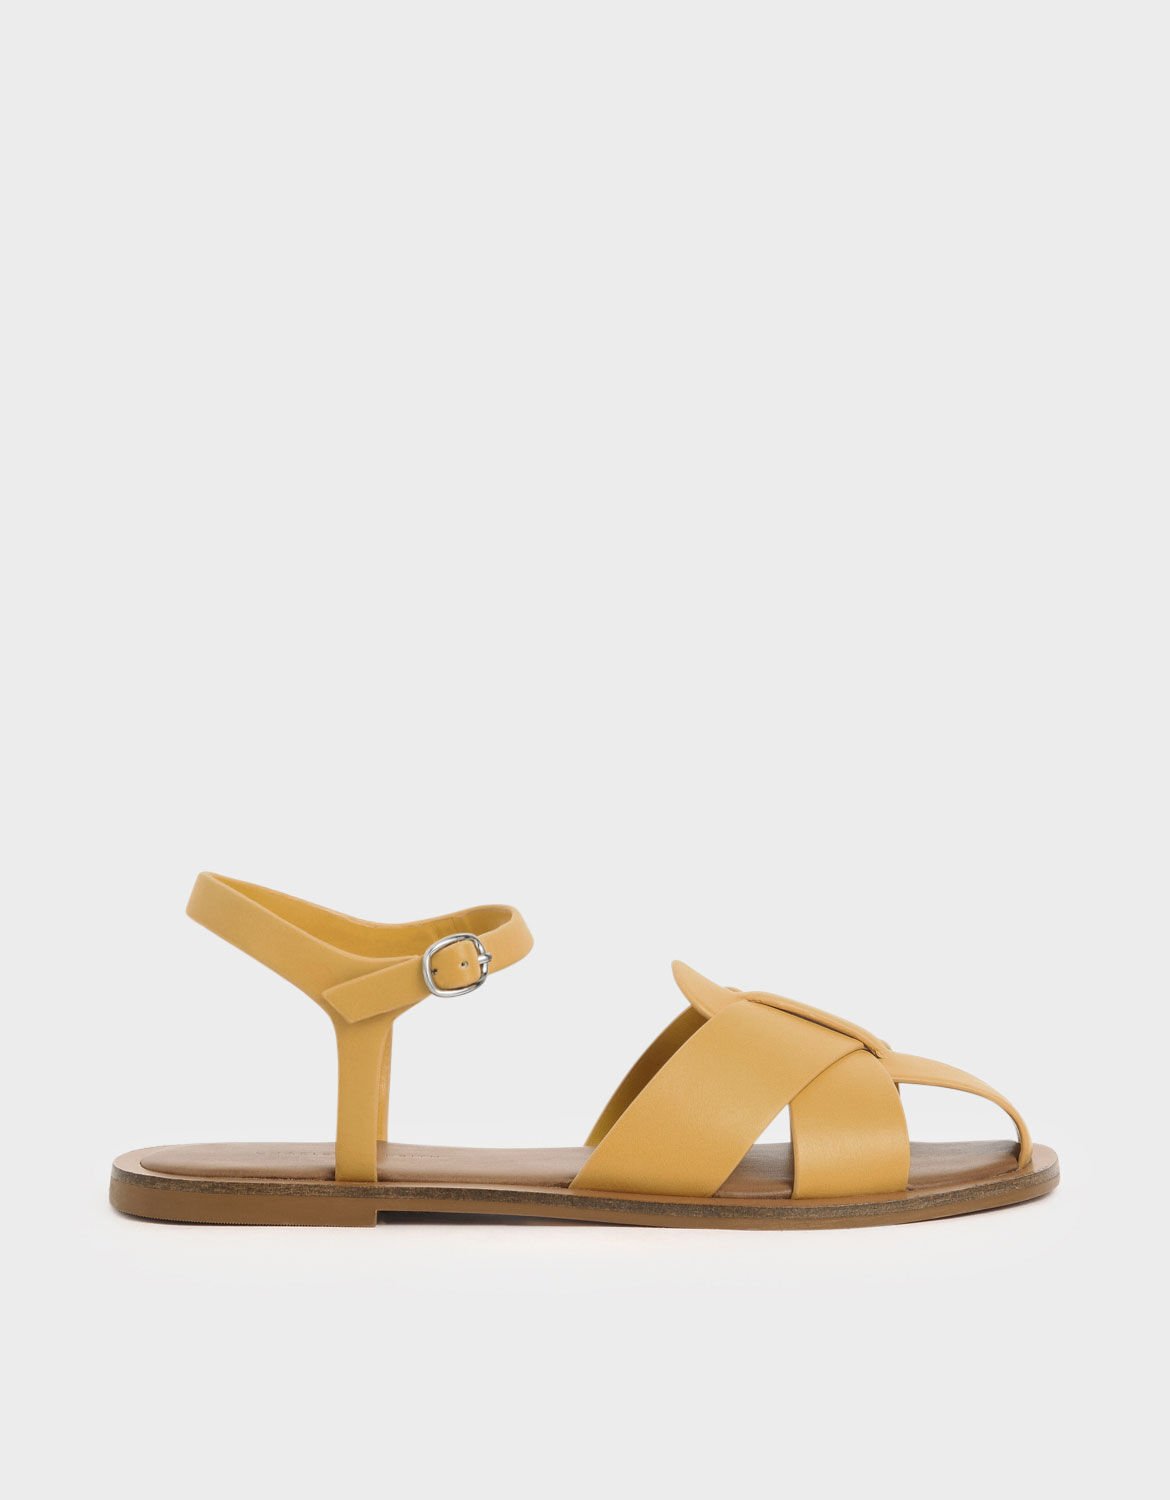 flat sandals that cover toes